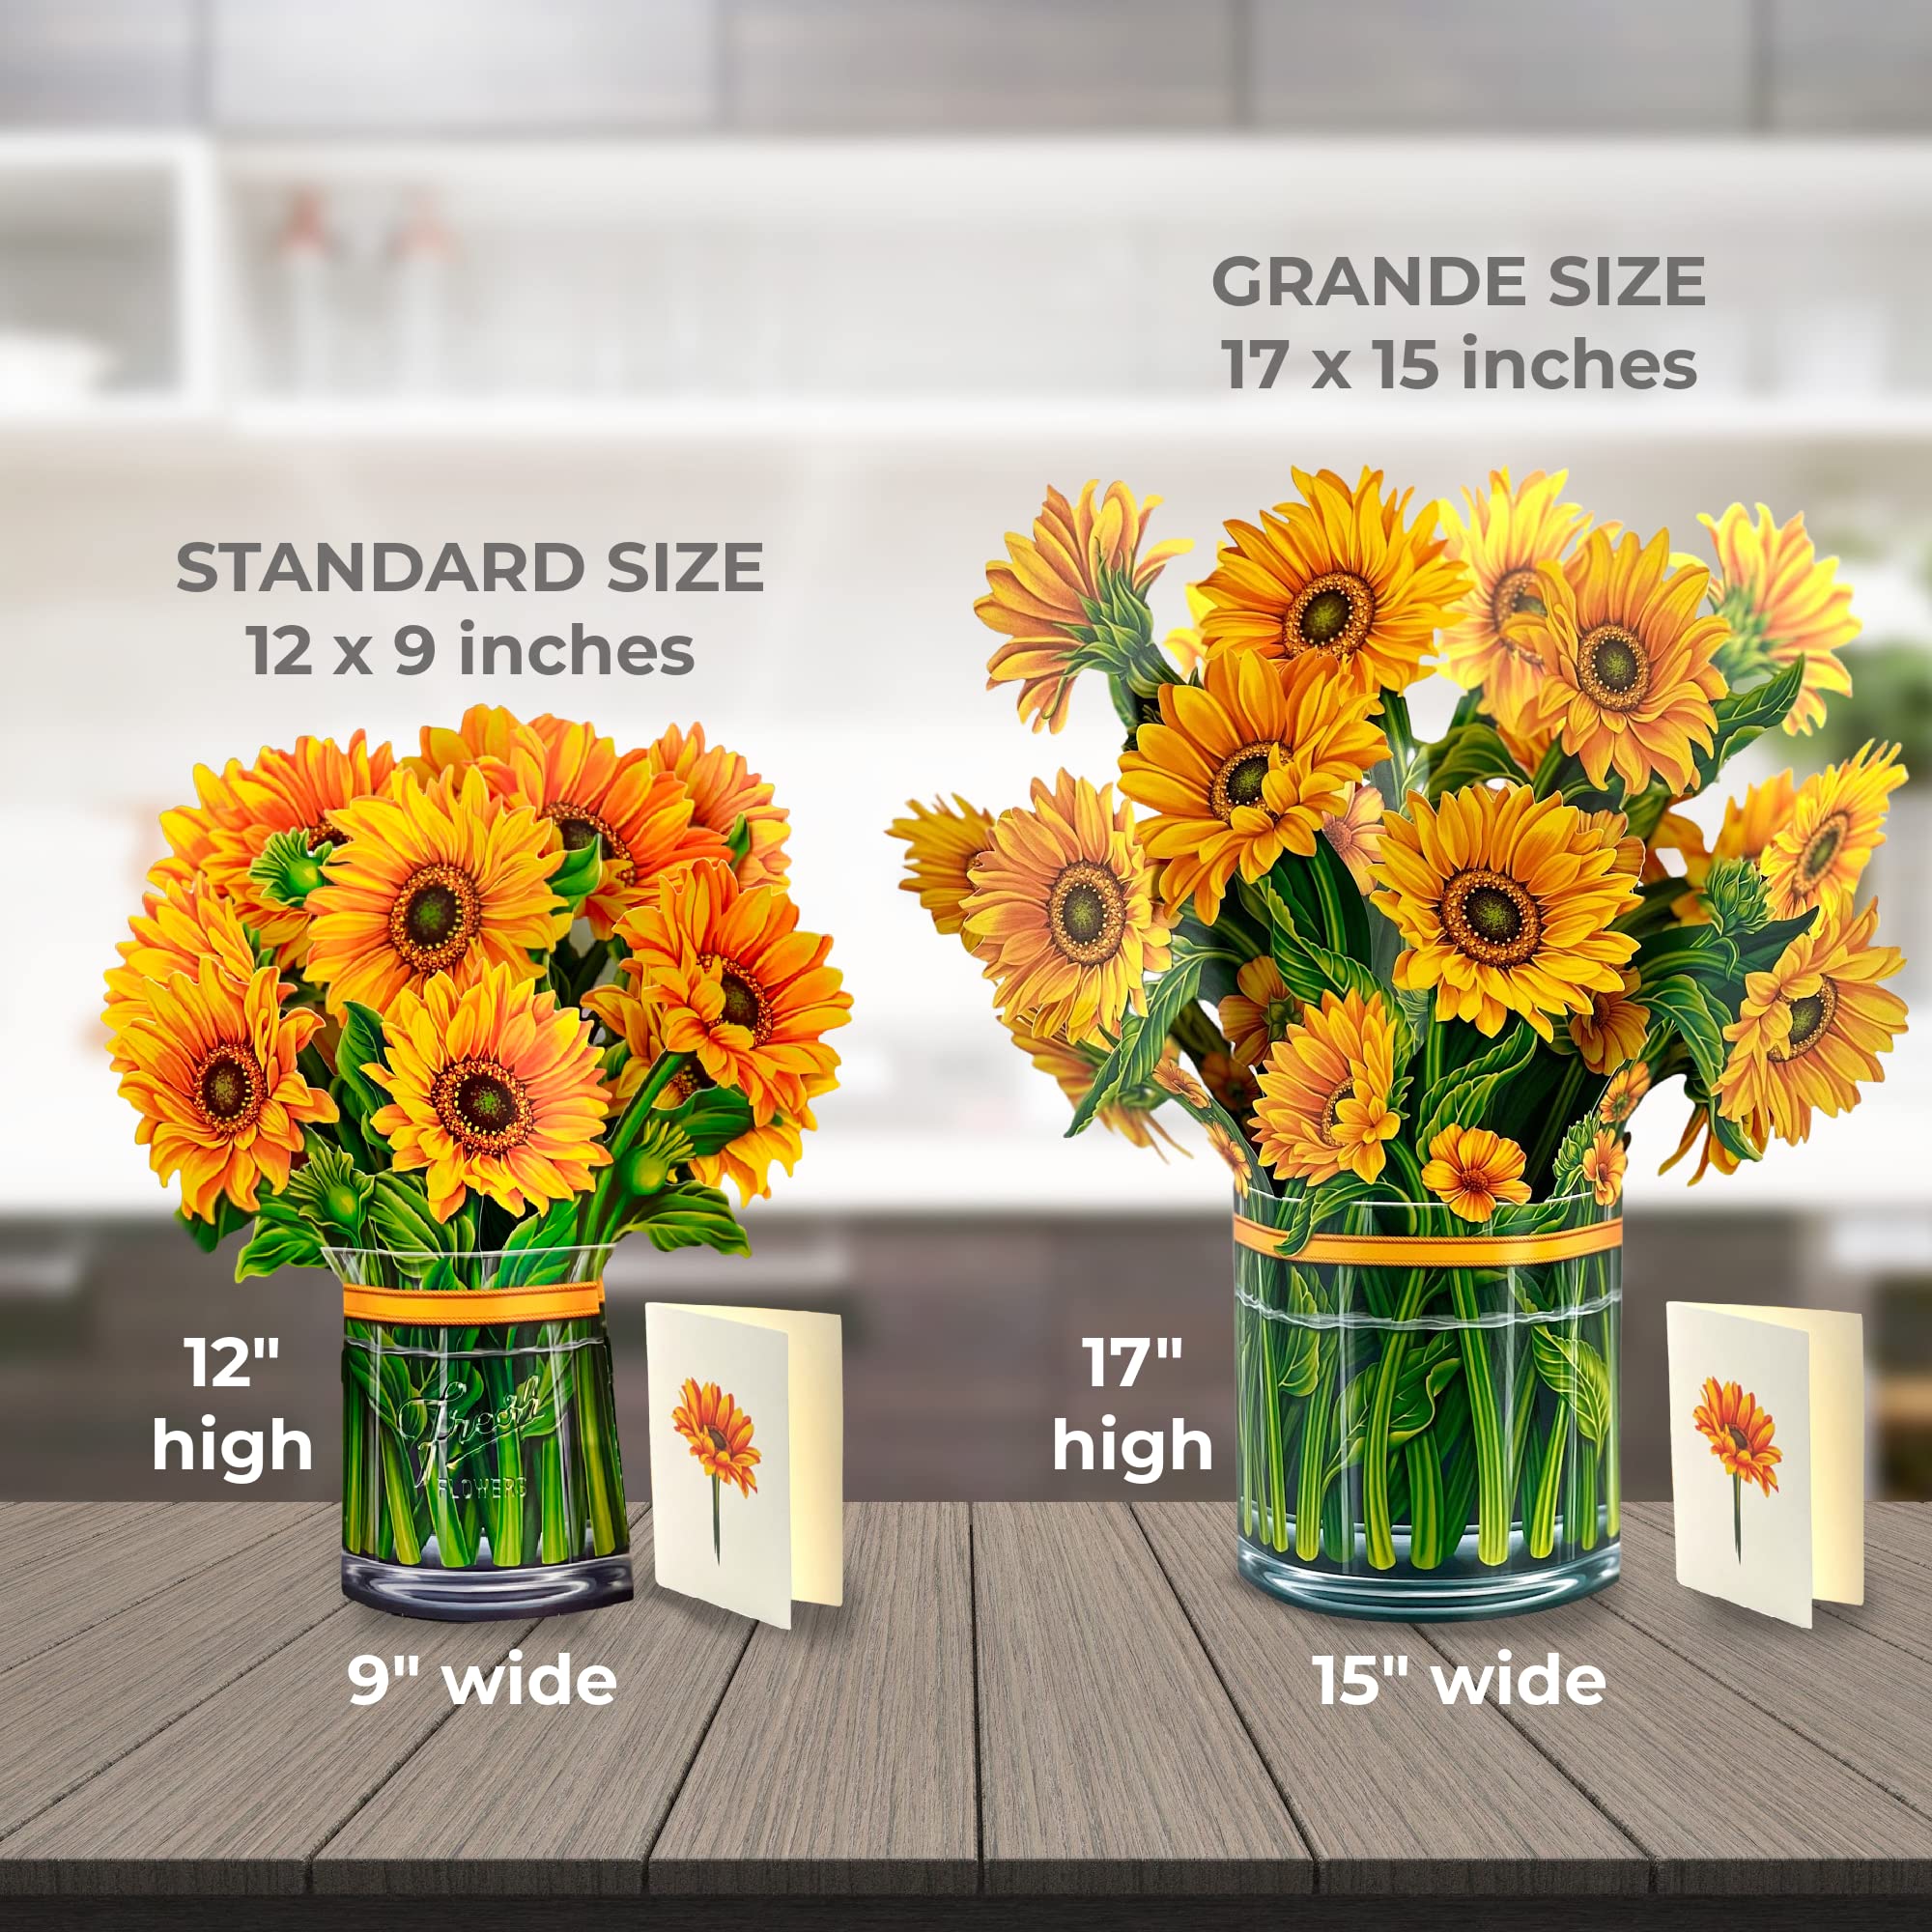 Freshcut Paper Pop Up Cards, Sunflower Grande, 18 inch Life Sized Forever Flower Bouquet 3D Popup Greeting Cards with Note Card and Envelope - Sunflowers